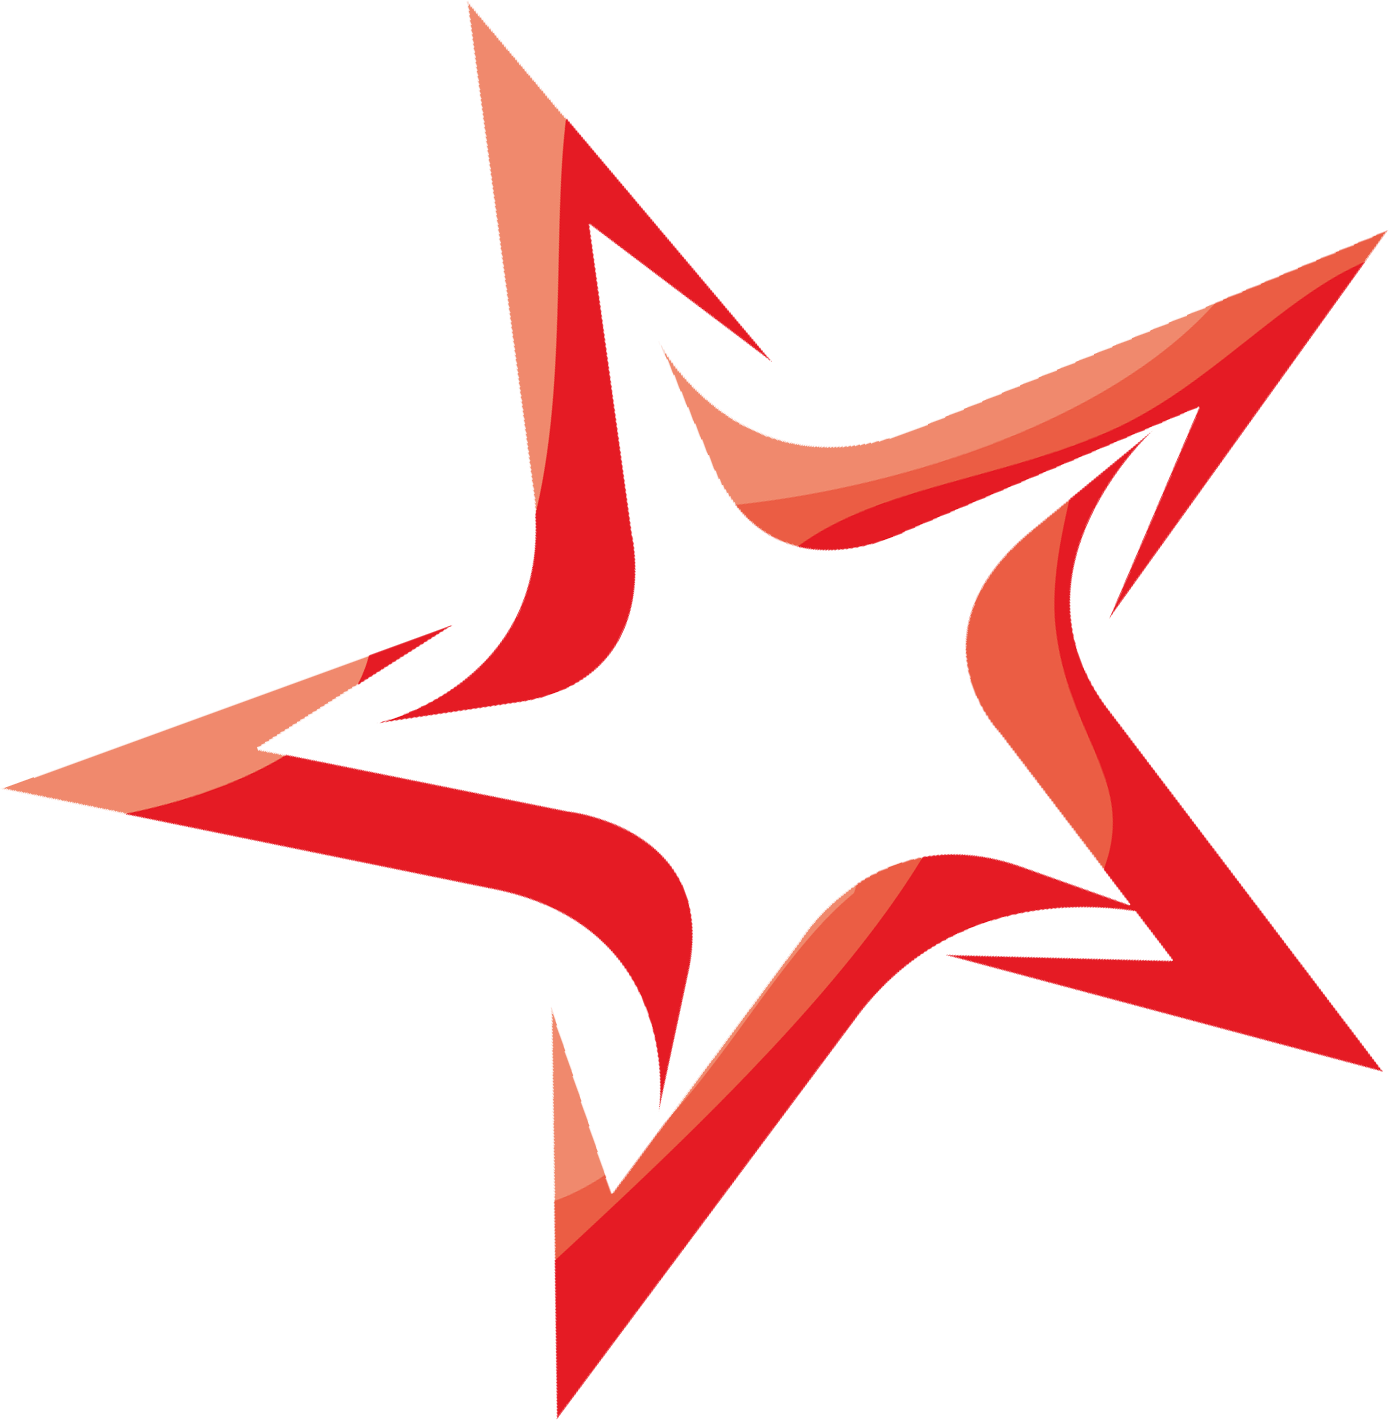 Red Star Logo - Images For > Red Star Logo Png #624 - Free Icons and PNG Backgrounds